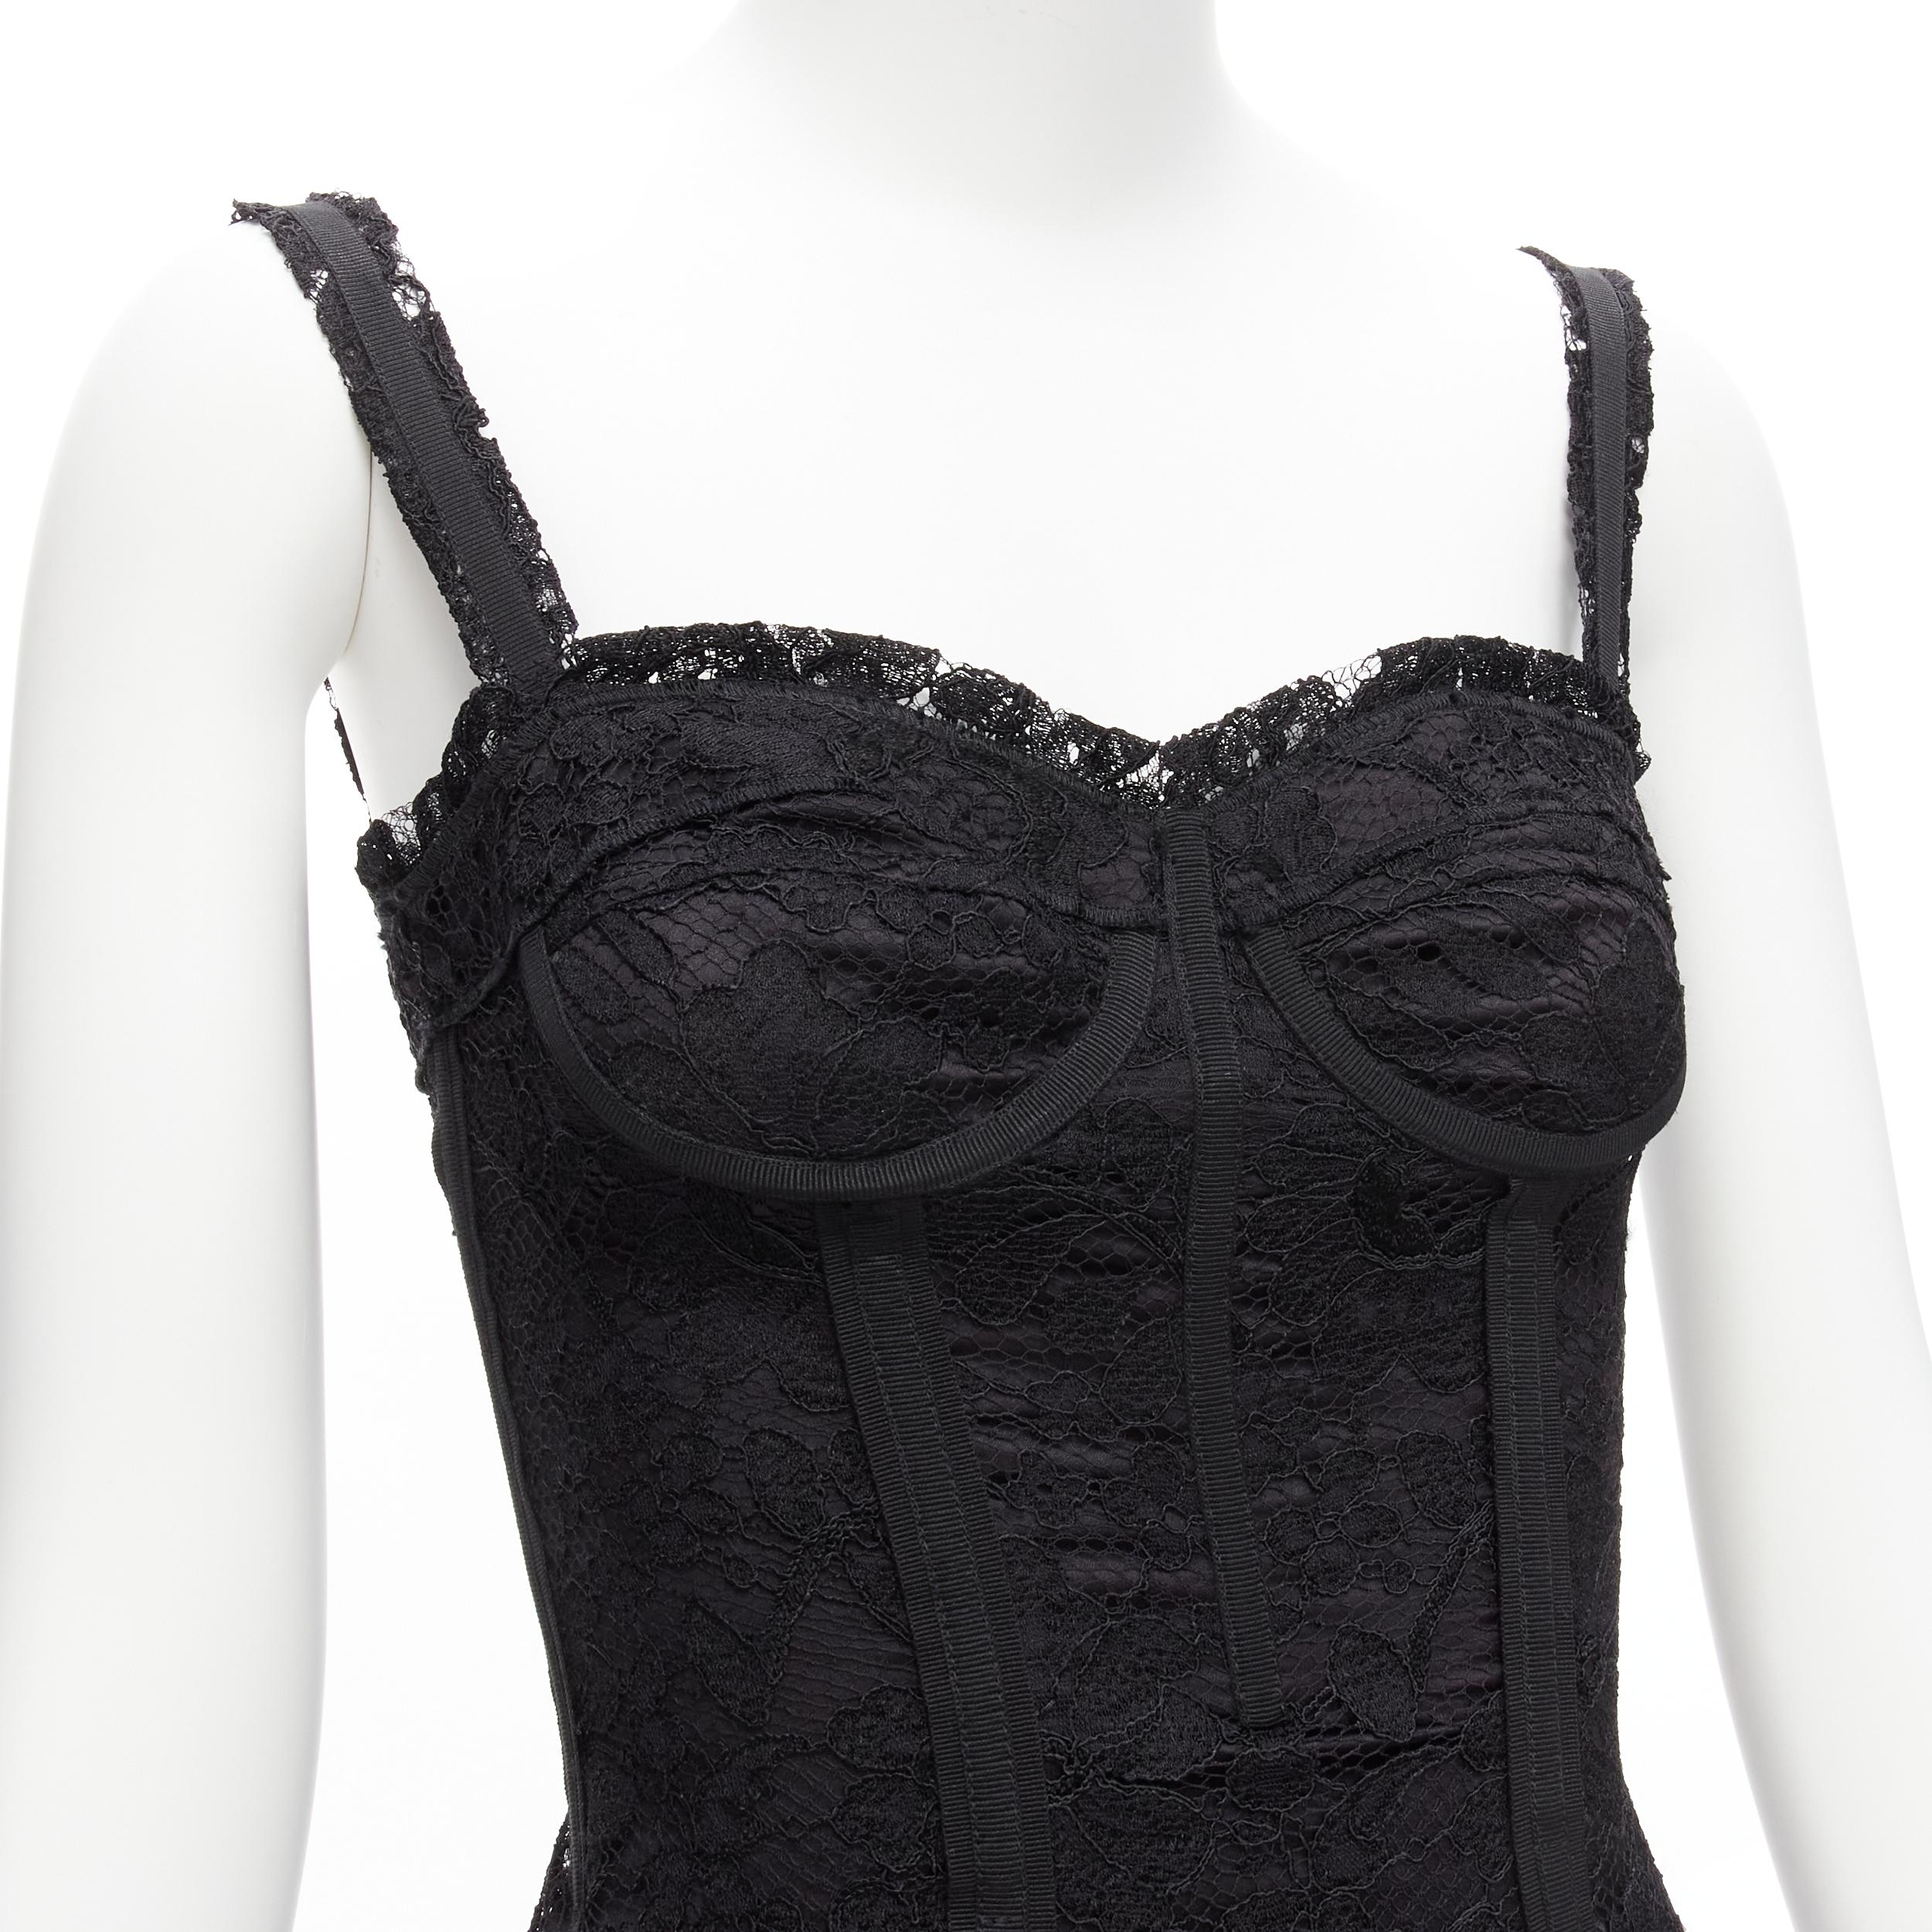 DOLCE GABBANA black lace bustier corset exposed boning cocktail dress IT36 XXS
Reference: TGAS/D00342
Brand: Dolce Gabbana
Designer: Domenico Dolce and Stefano Gabbana
Material: Viscose, Blend
Color: Black
Pattern: Lace
Closure: Zip
Lining: Black